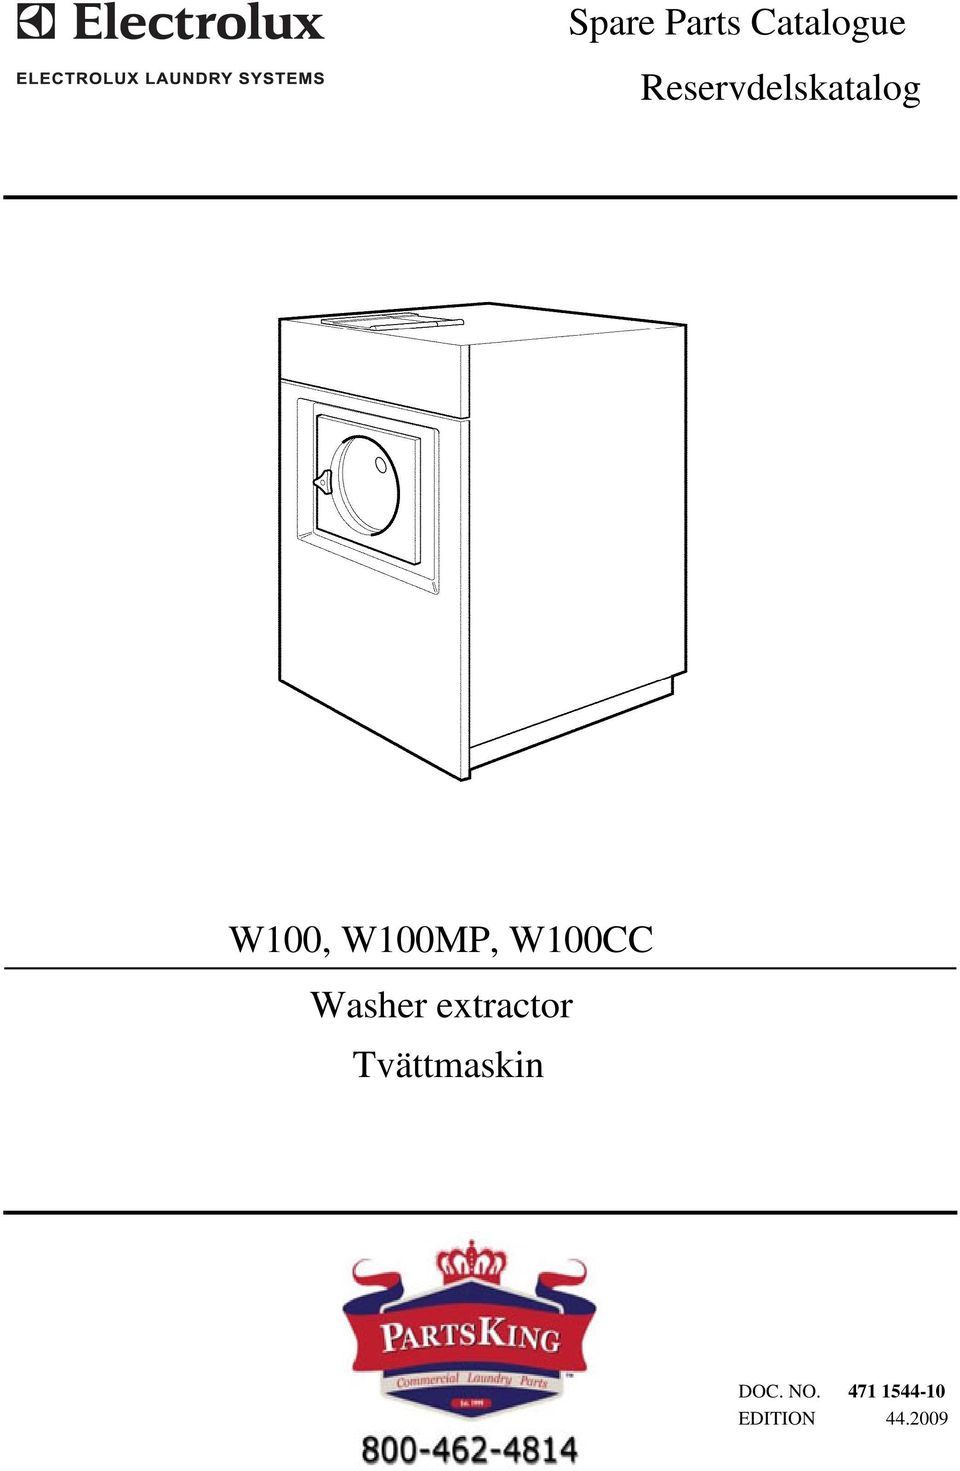 W100CC Washer extractor